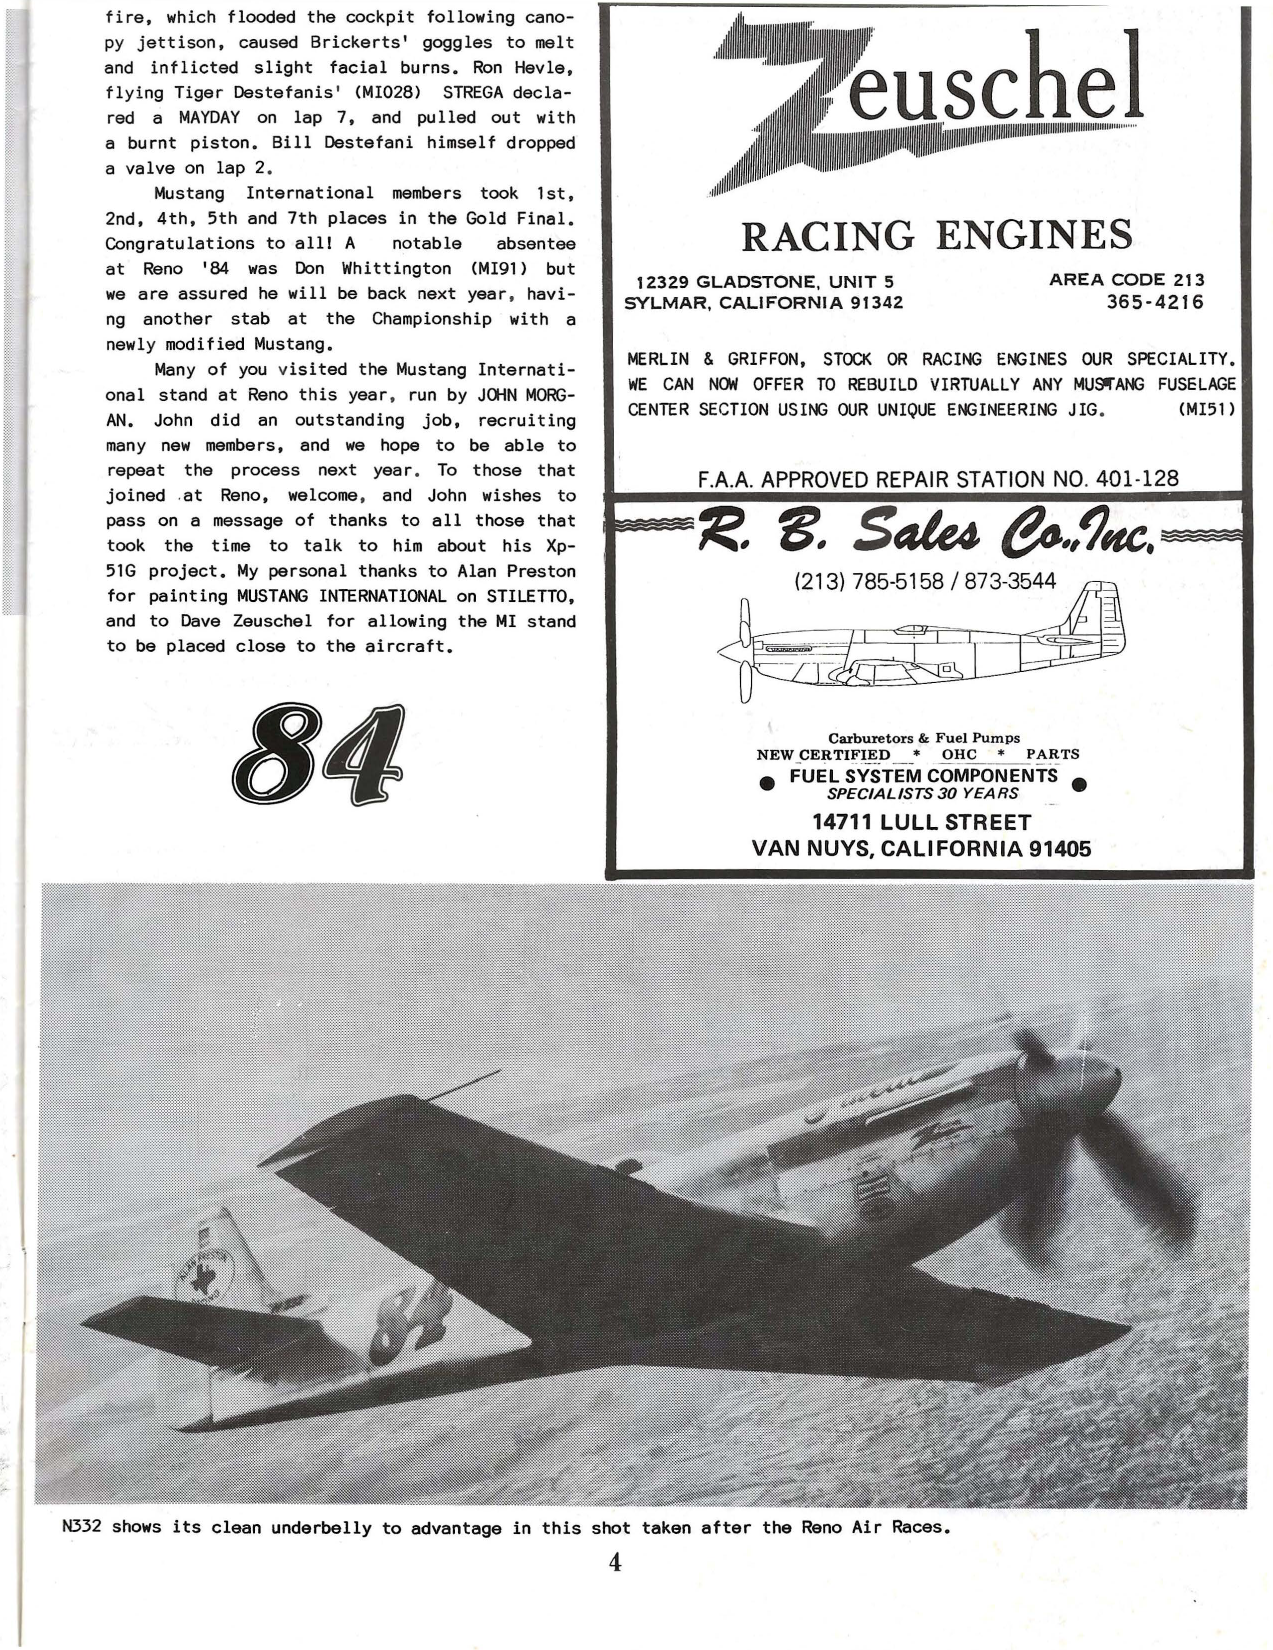 Sample page 5 from AirCorps Library document: Mustang World - Issue 5